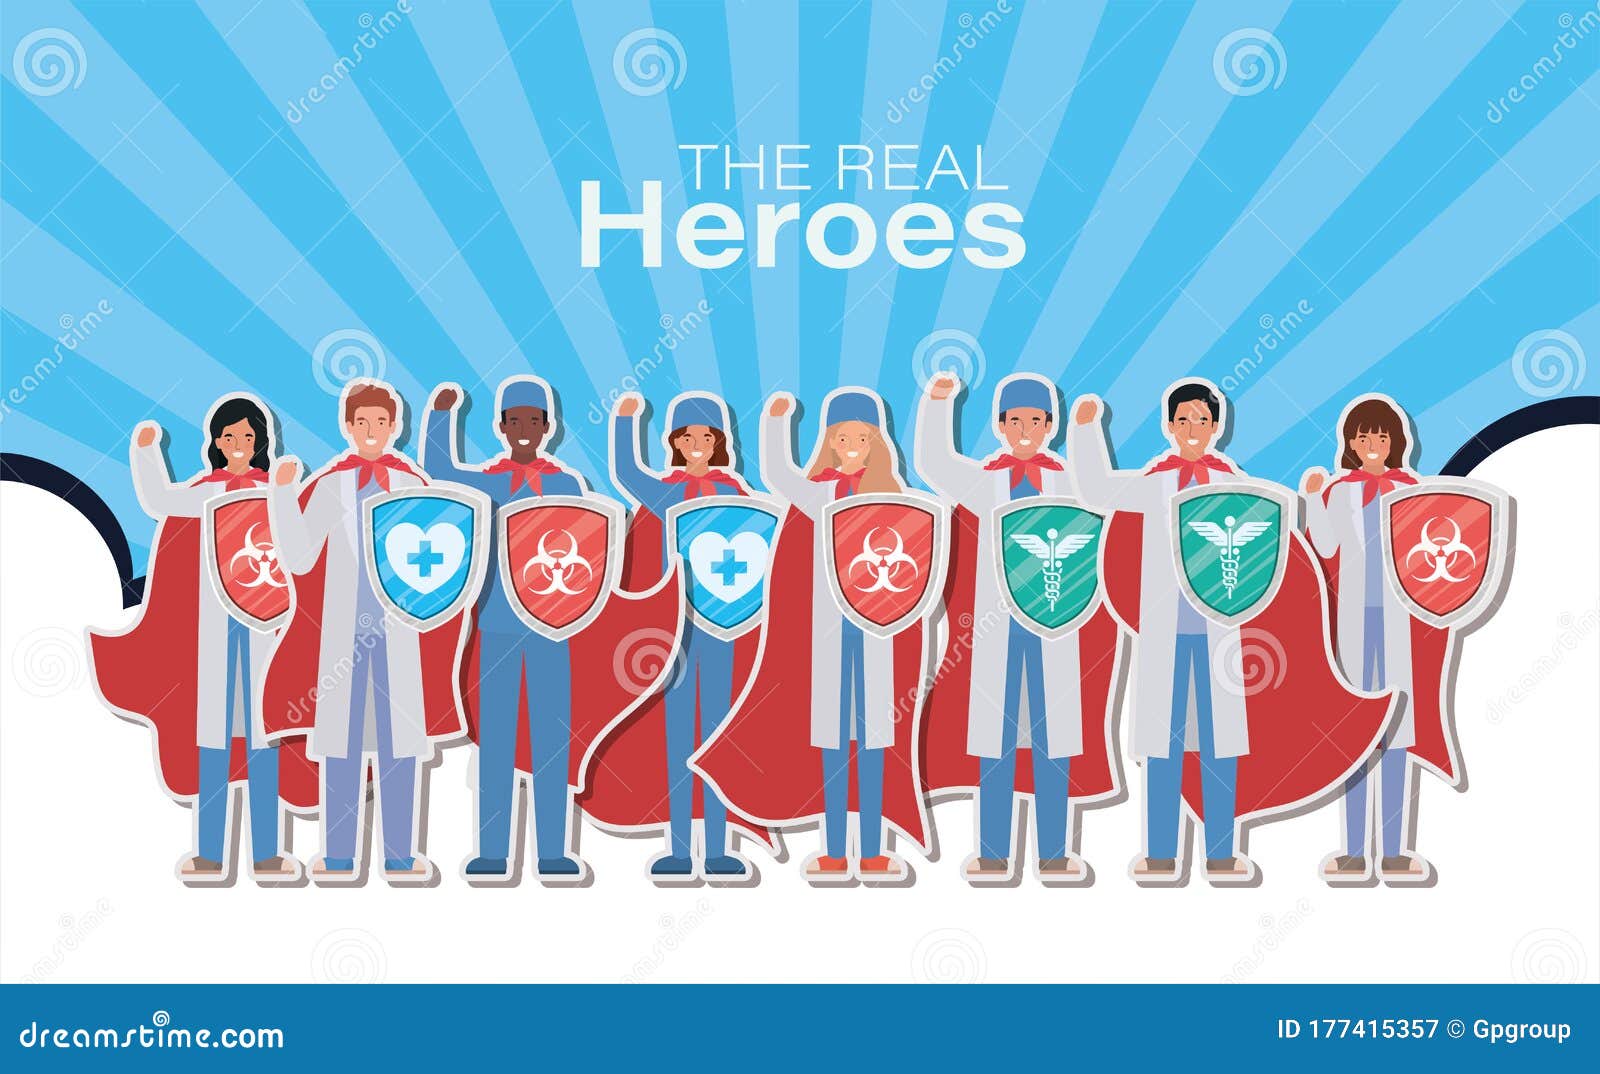 women and men doctors heroes with cape and shield against 2019 ncov virus  